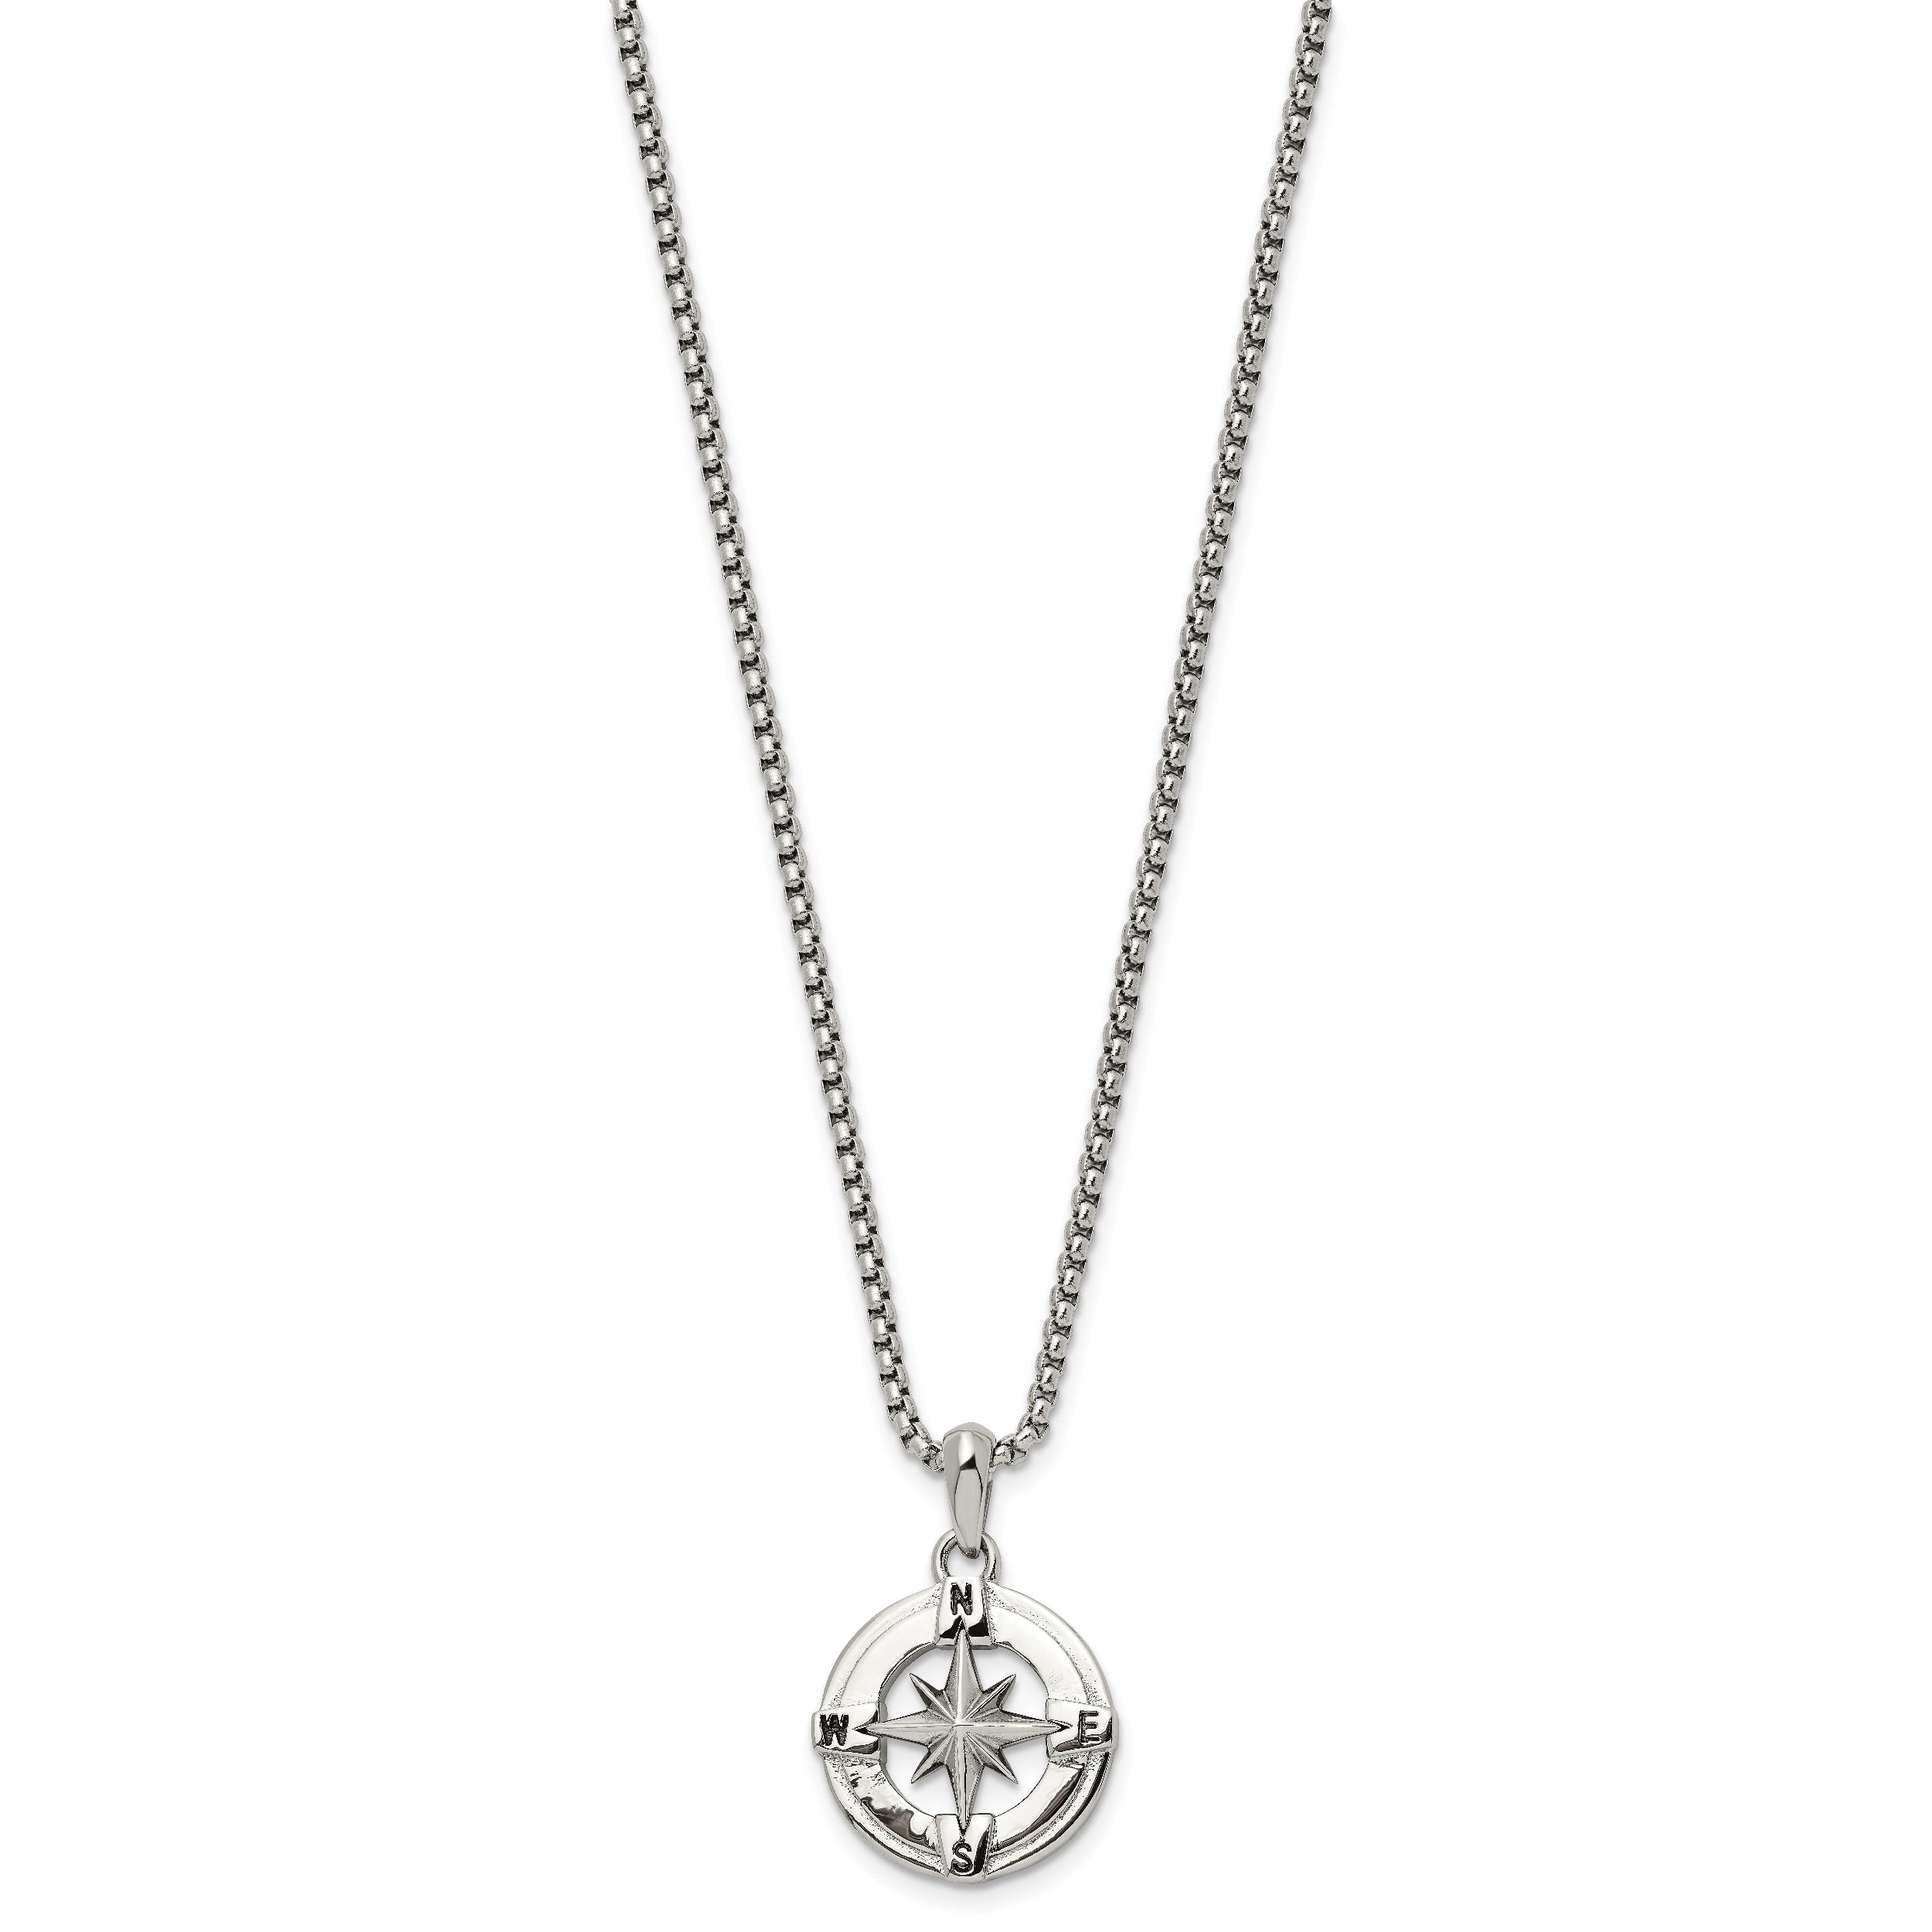 Chisel Stainless Steel Polished Compass Pendant on a 22 inch Box Chain Necklace